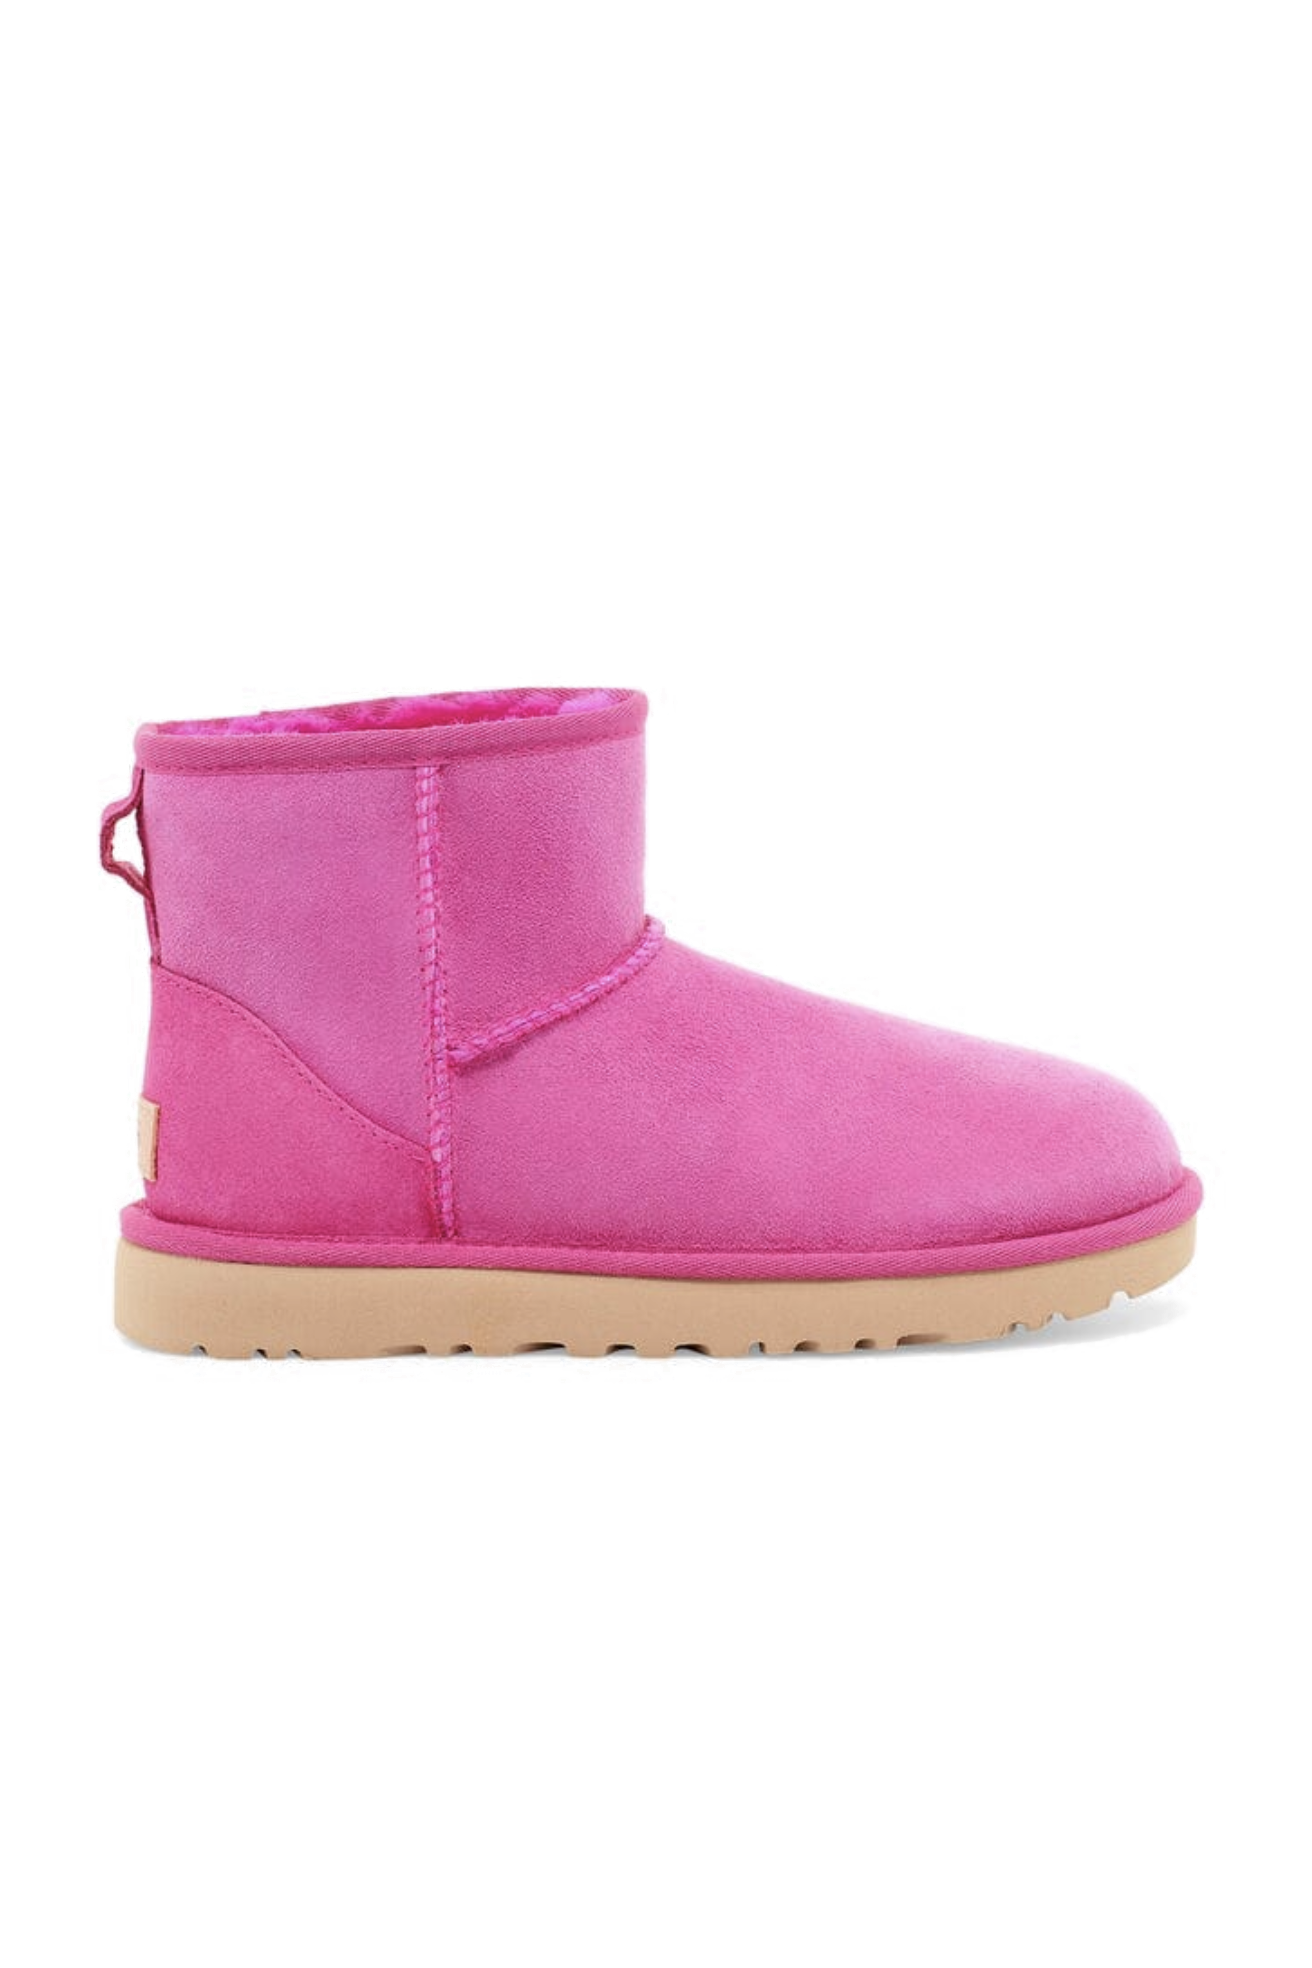 pink uggs new